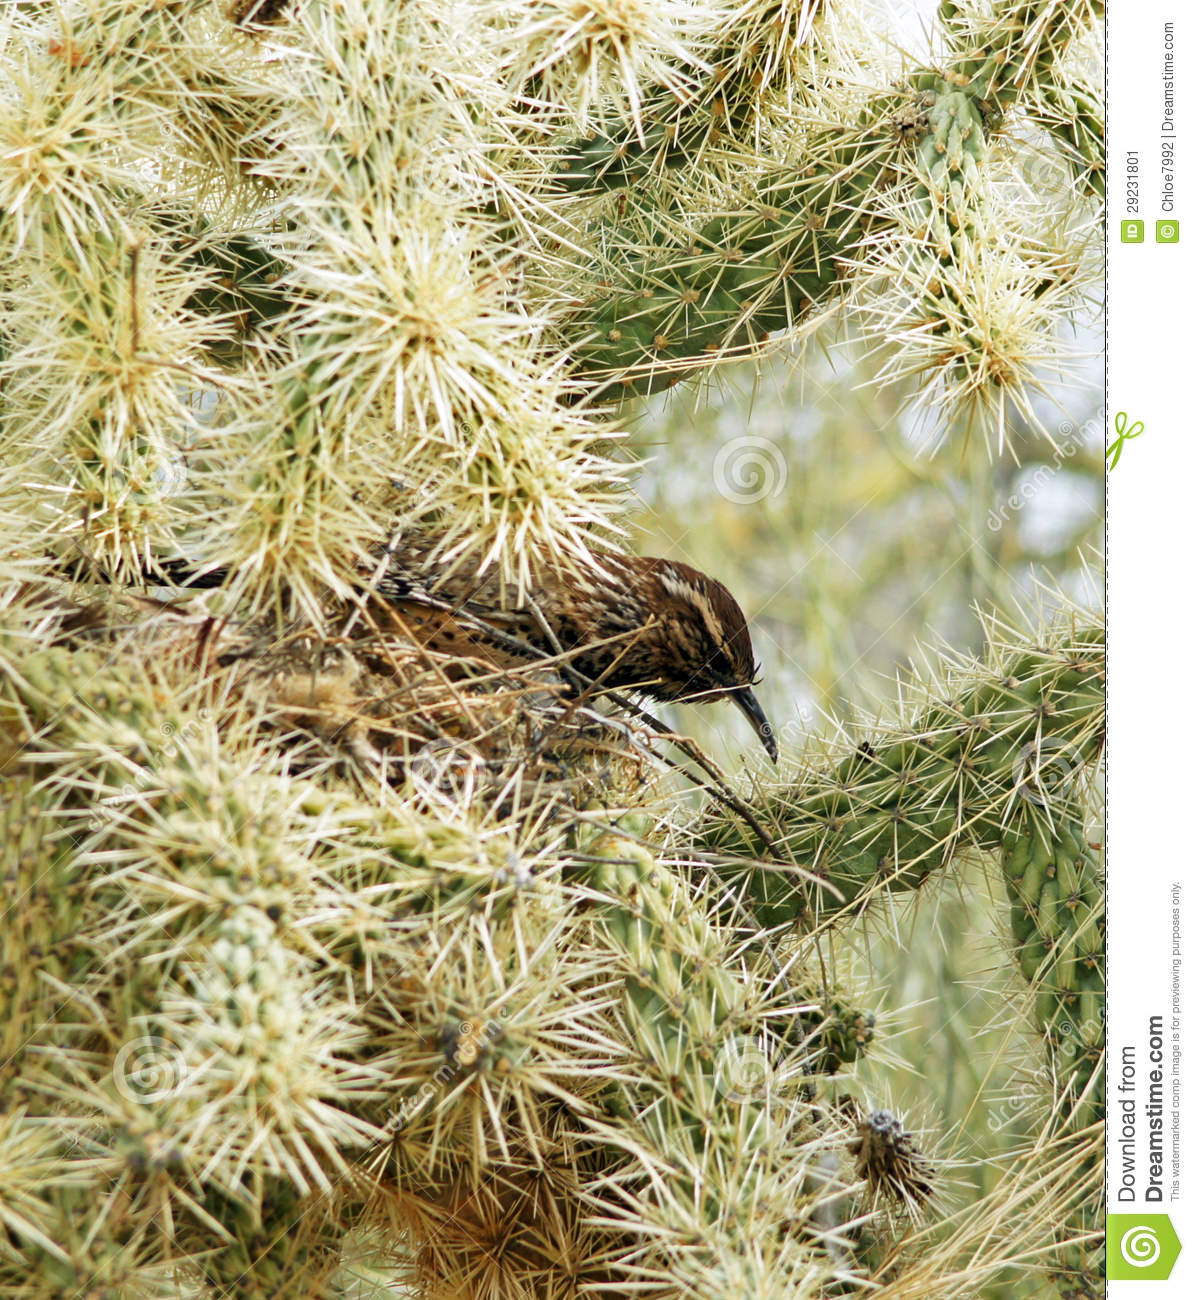 Cactus Wren Peeks Out Of Her Nest In The Cholla  The Cactus Protects    